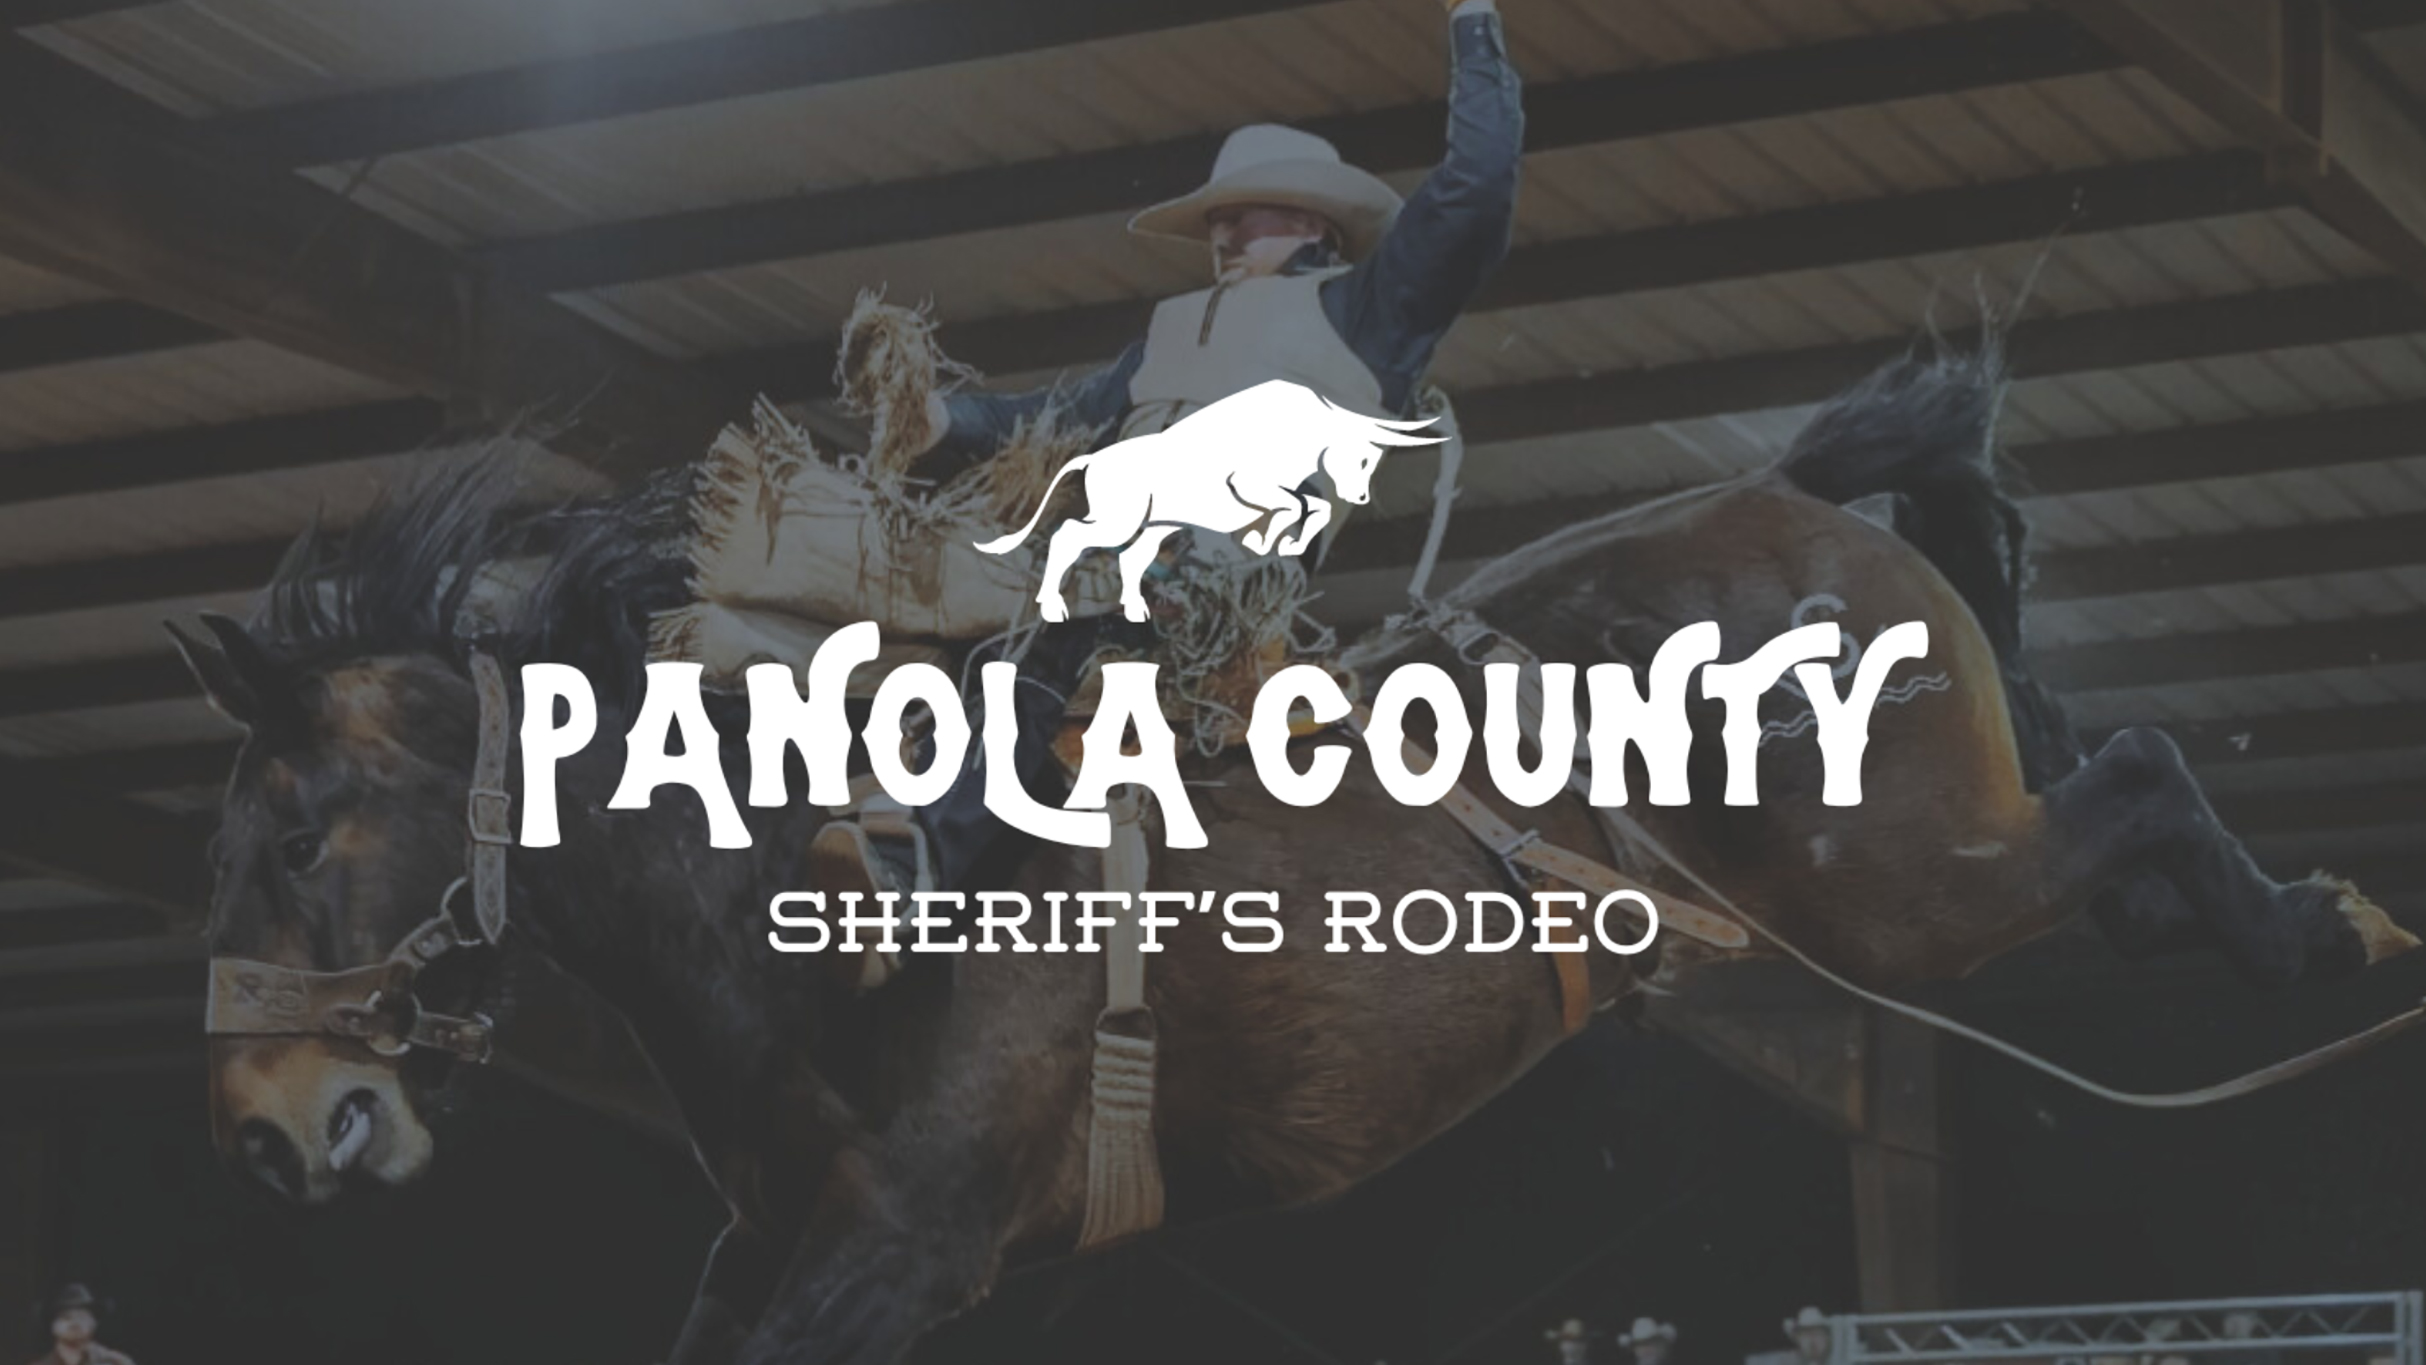 Panola County Sheriff's Rodeo